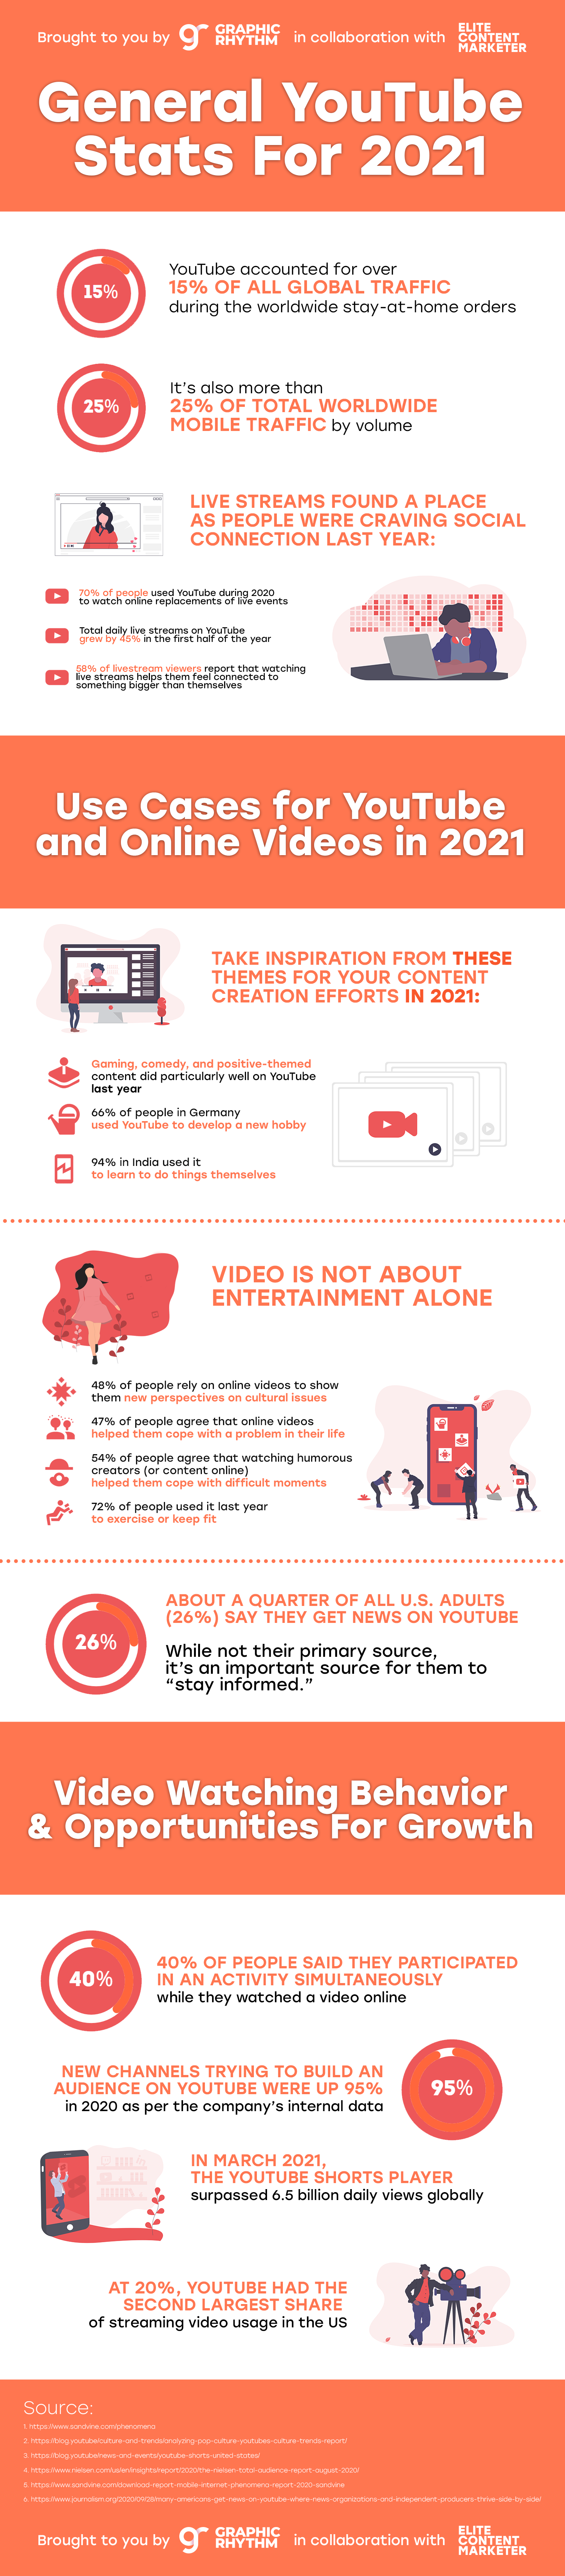 State of YouTube In 2021 [Infographic] | DeviceDaily.com